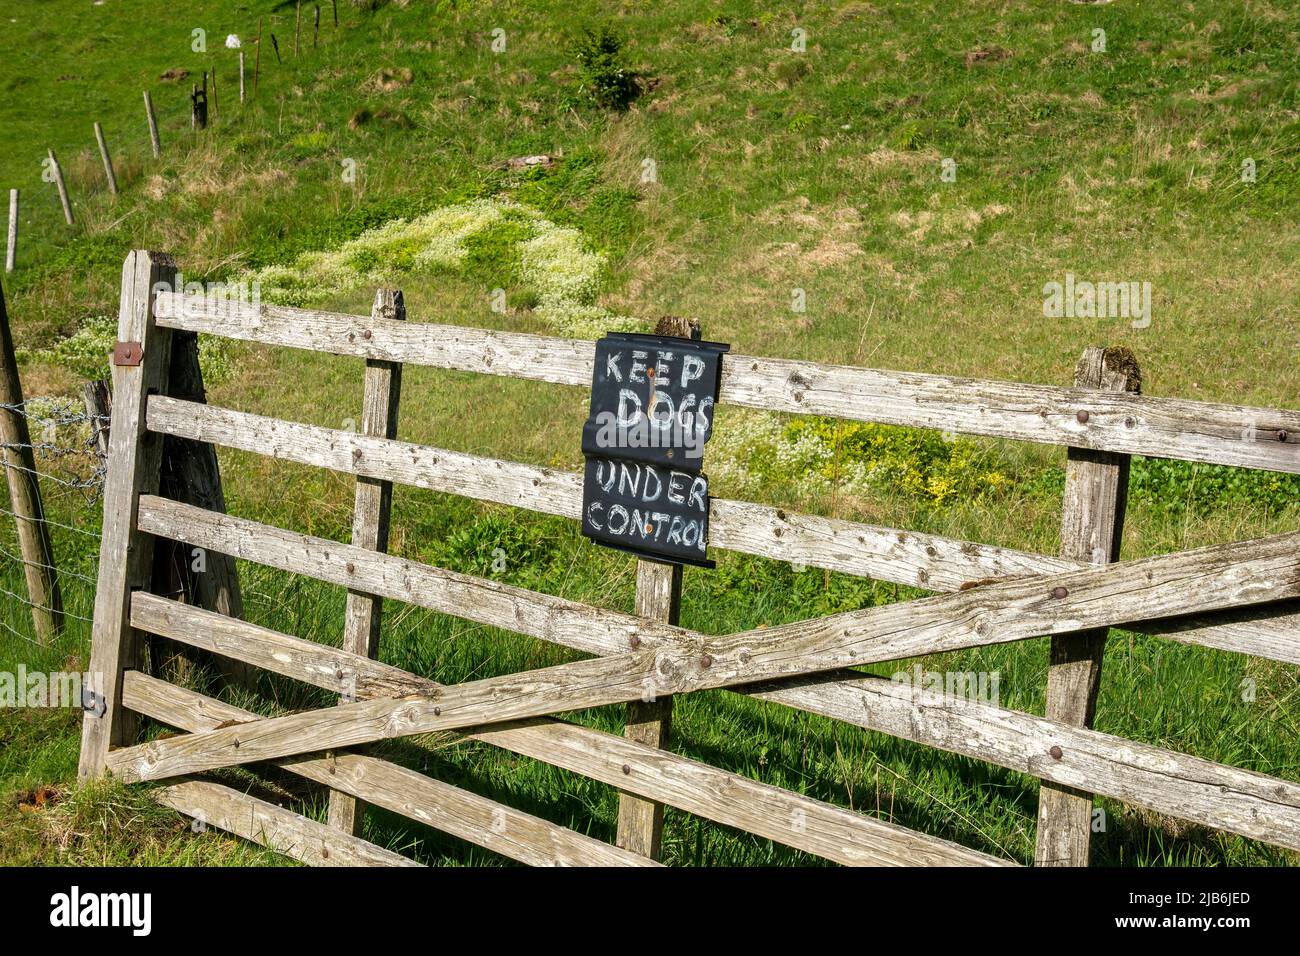 Rural signs on a wooden gate a farmers polite notice for dog owners to keep pets under control to protect livestock Stock Photo